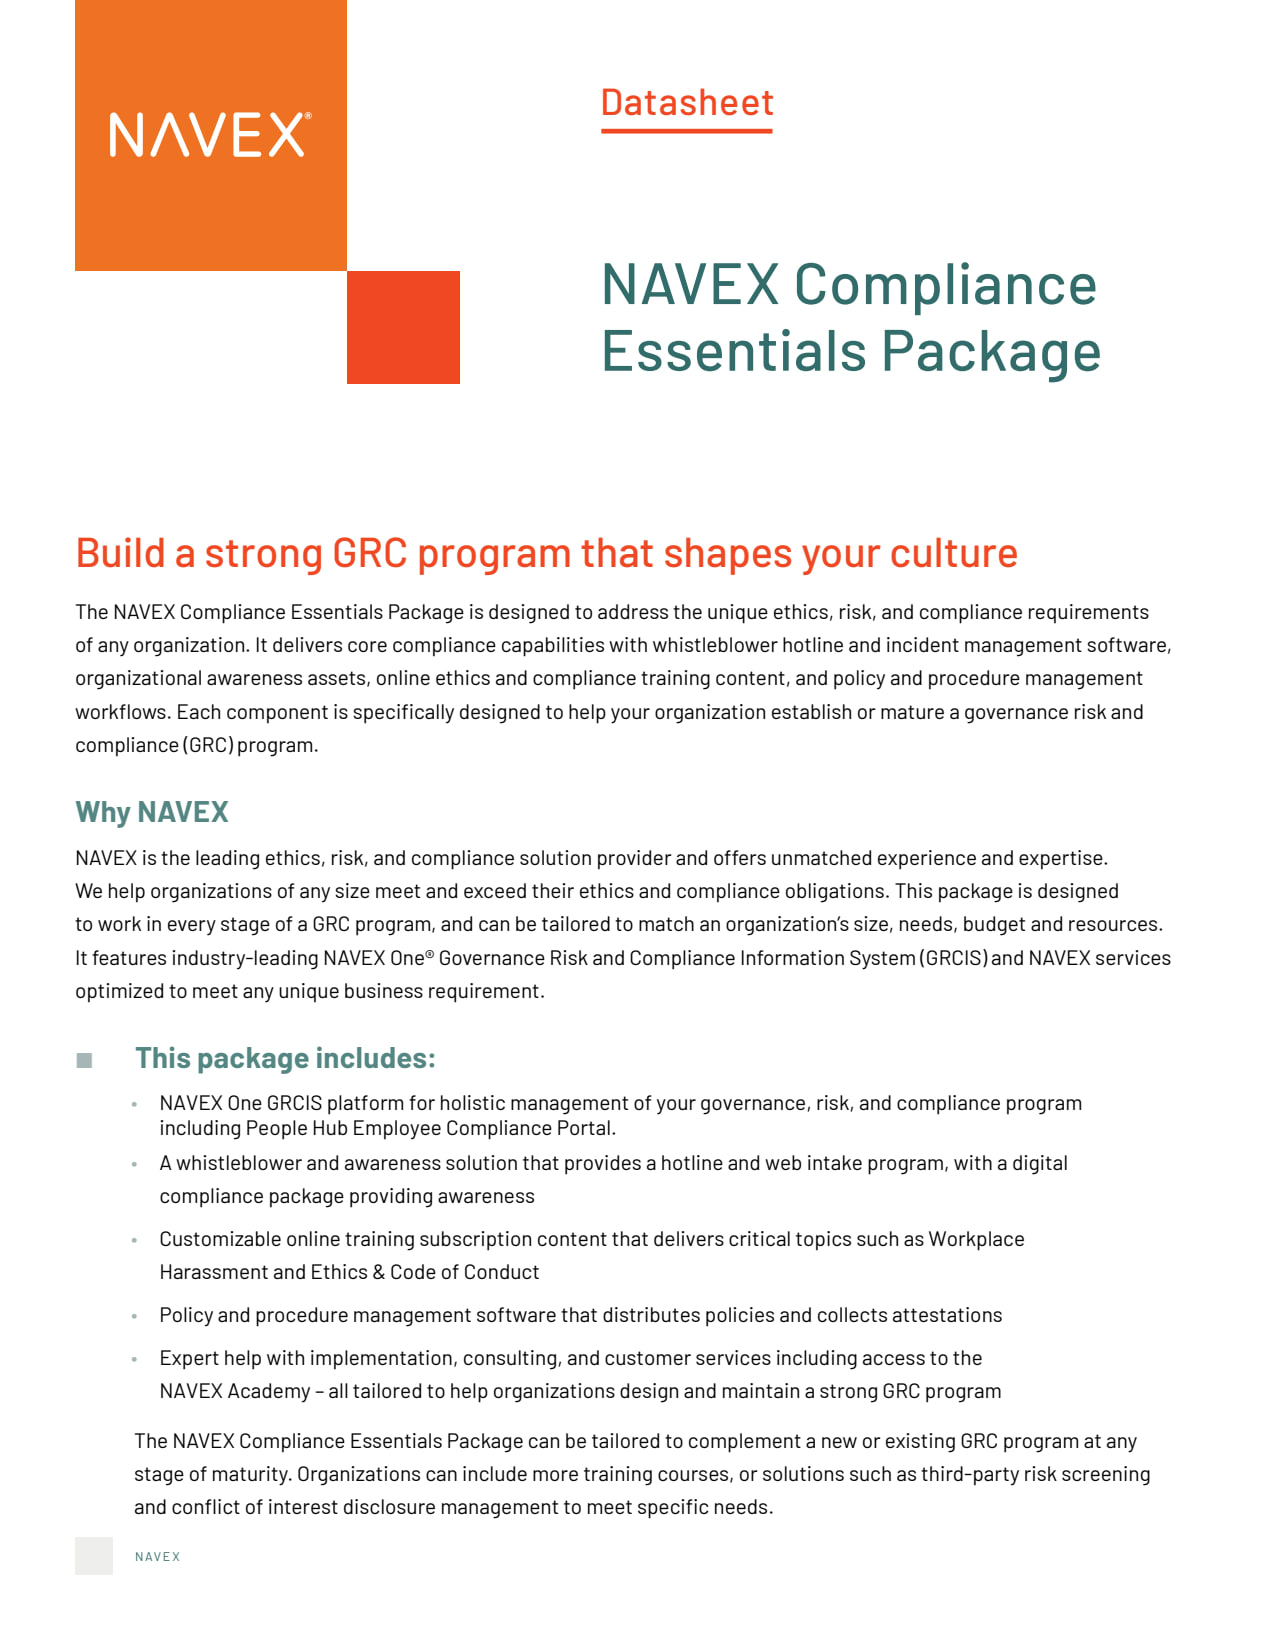 NAVEX One Compliance Essentials Package